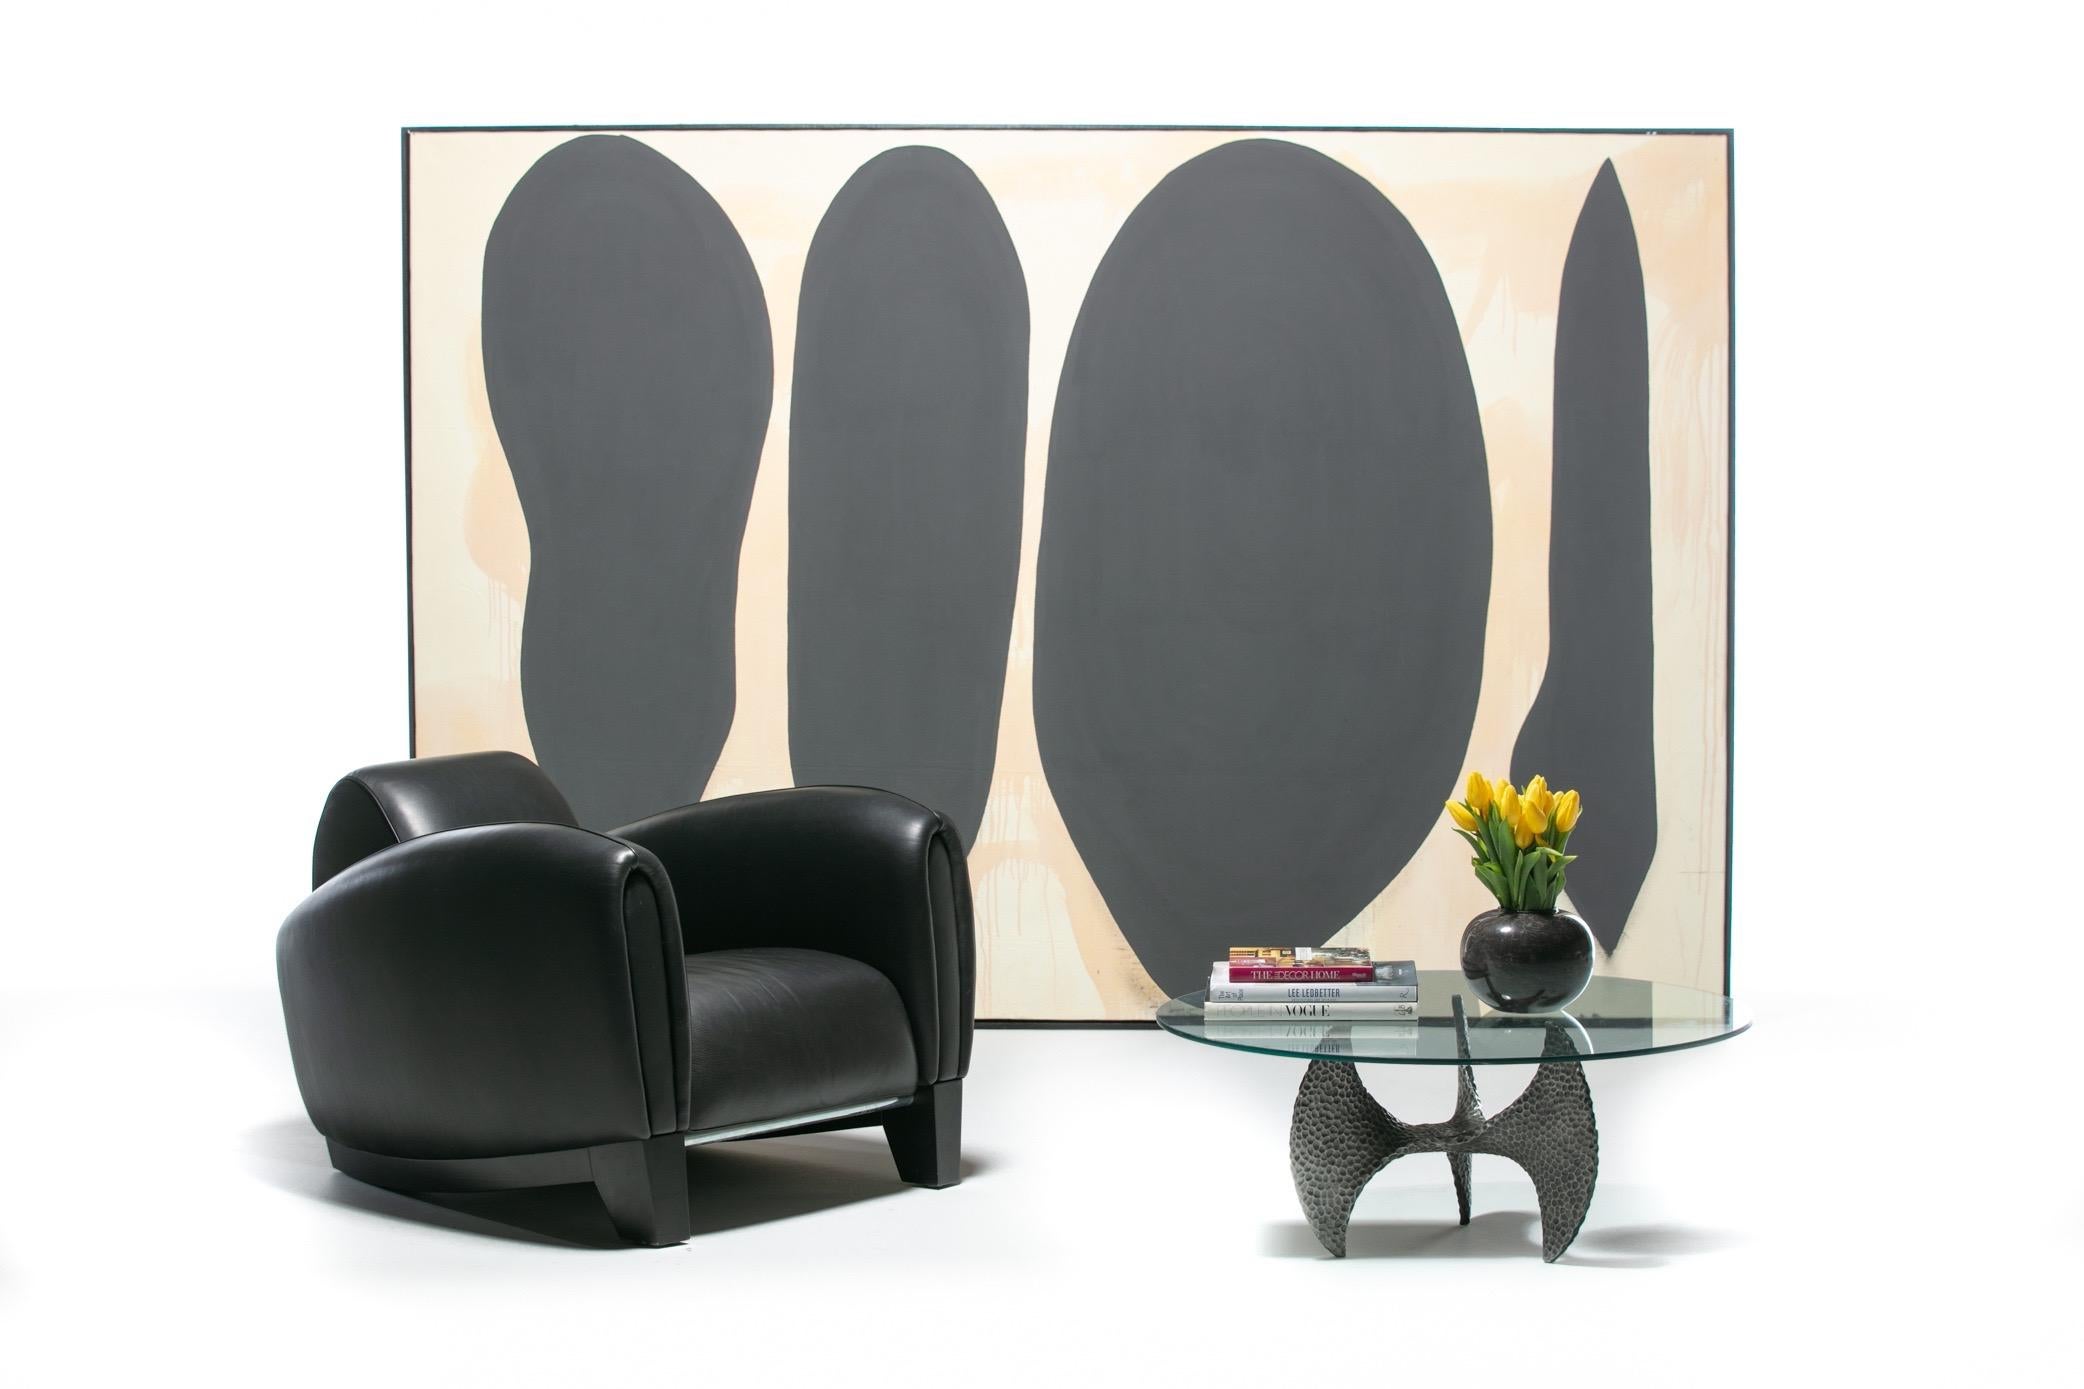 Organic dark shapes highlighted with brushed edges perfectly merge sculpture and texture in this Paul Evans style Brutalist Propeller coffee table. The shape and legs of the coffee table resemble a propeller, hence the reference, and is made of